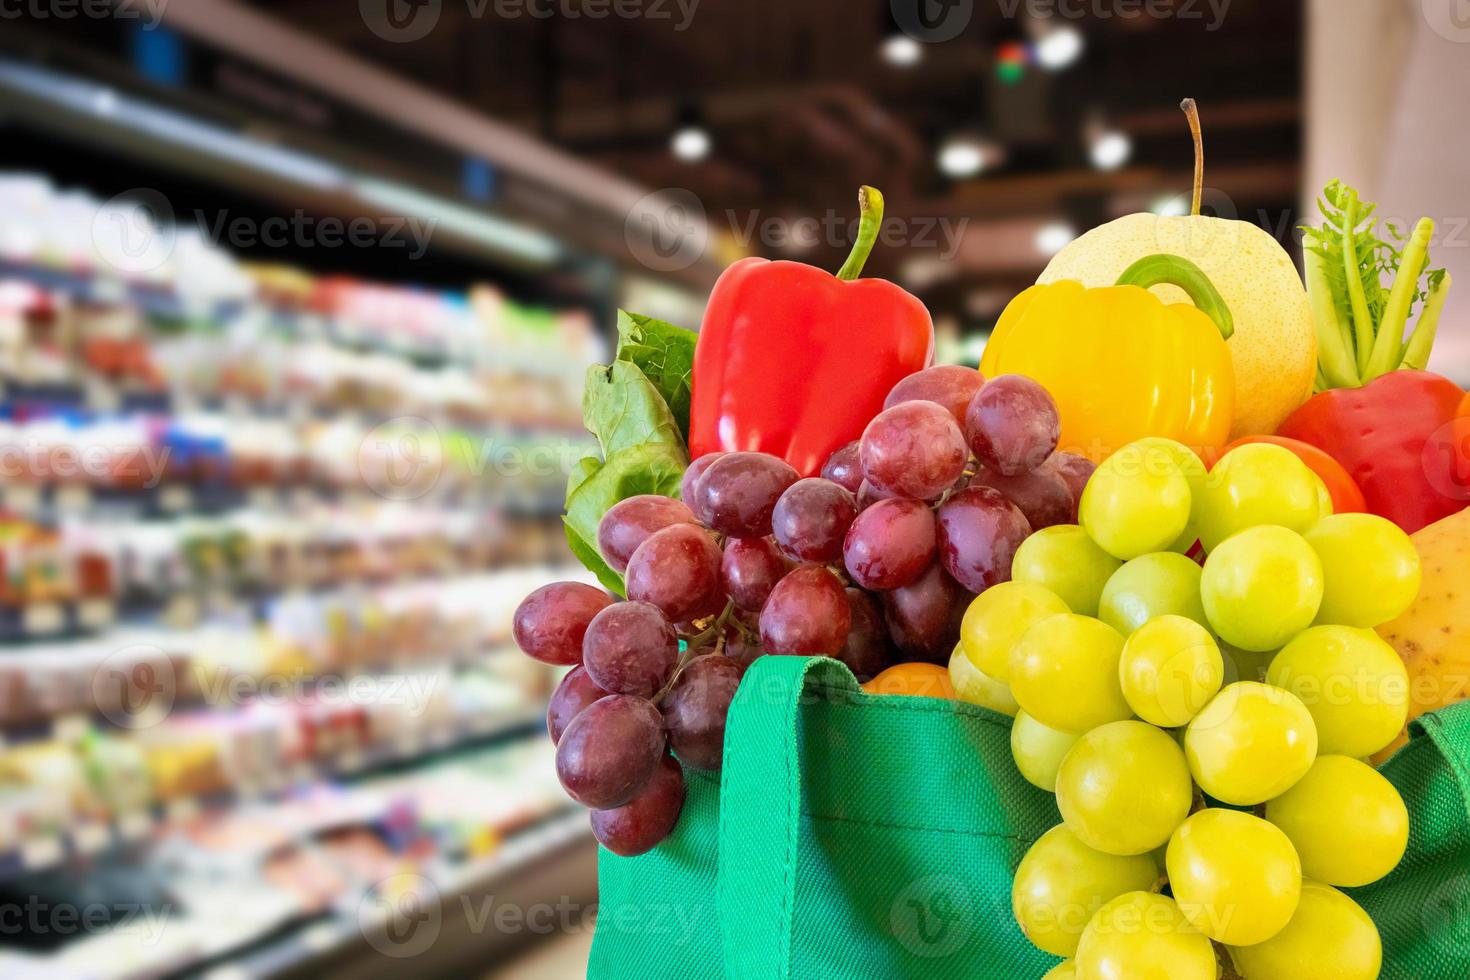 Fresh fruits and vegetables in reusable green shopping bag with supermarket grocery store blurred defocused background with bokeh light photo